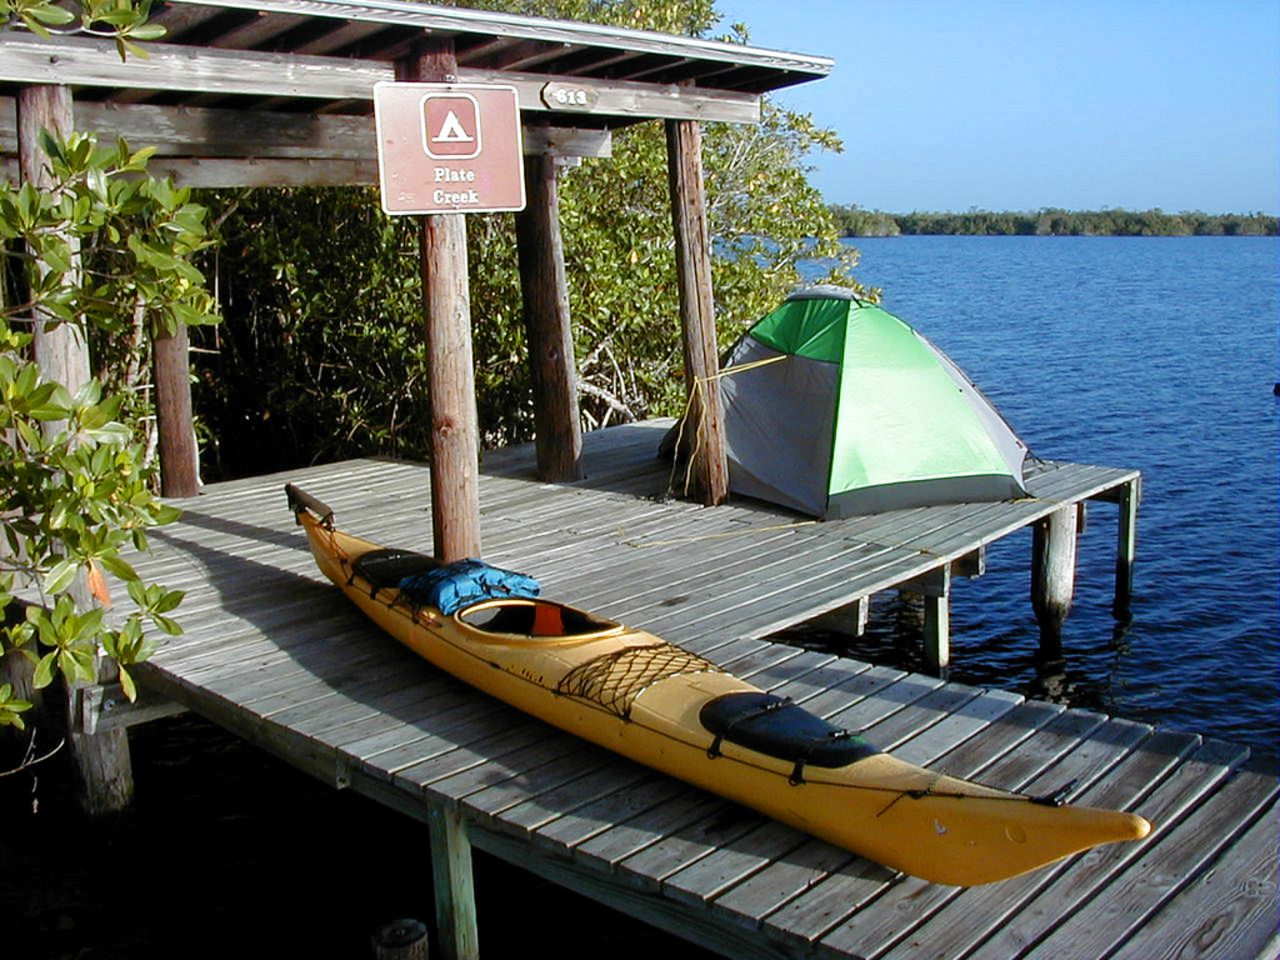 Throughout the park's mangrove estuary and the Florida Bay are 17 chickee camping sites. Chickees are raised and covered platforms. They have a toilet and not much else. 